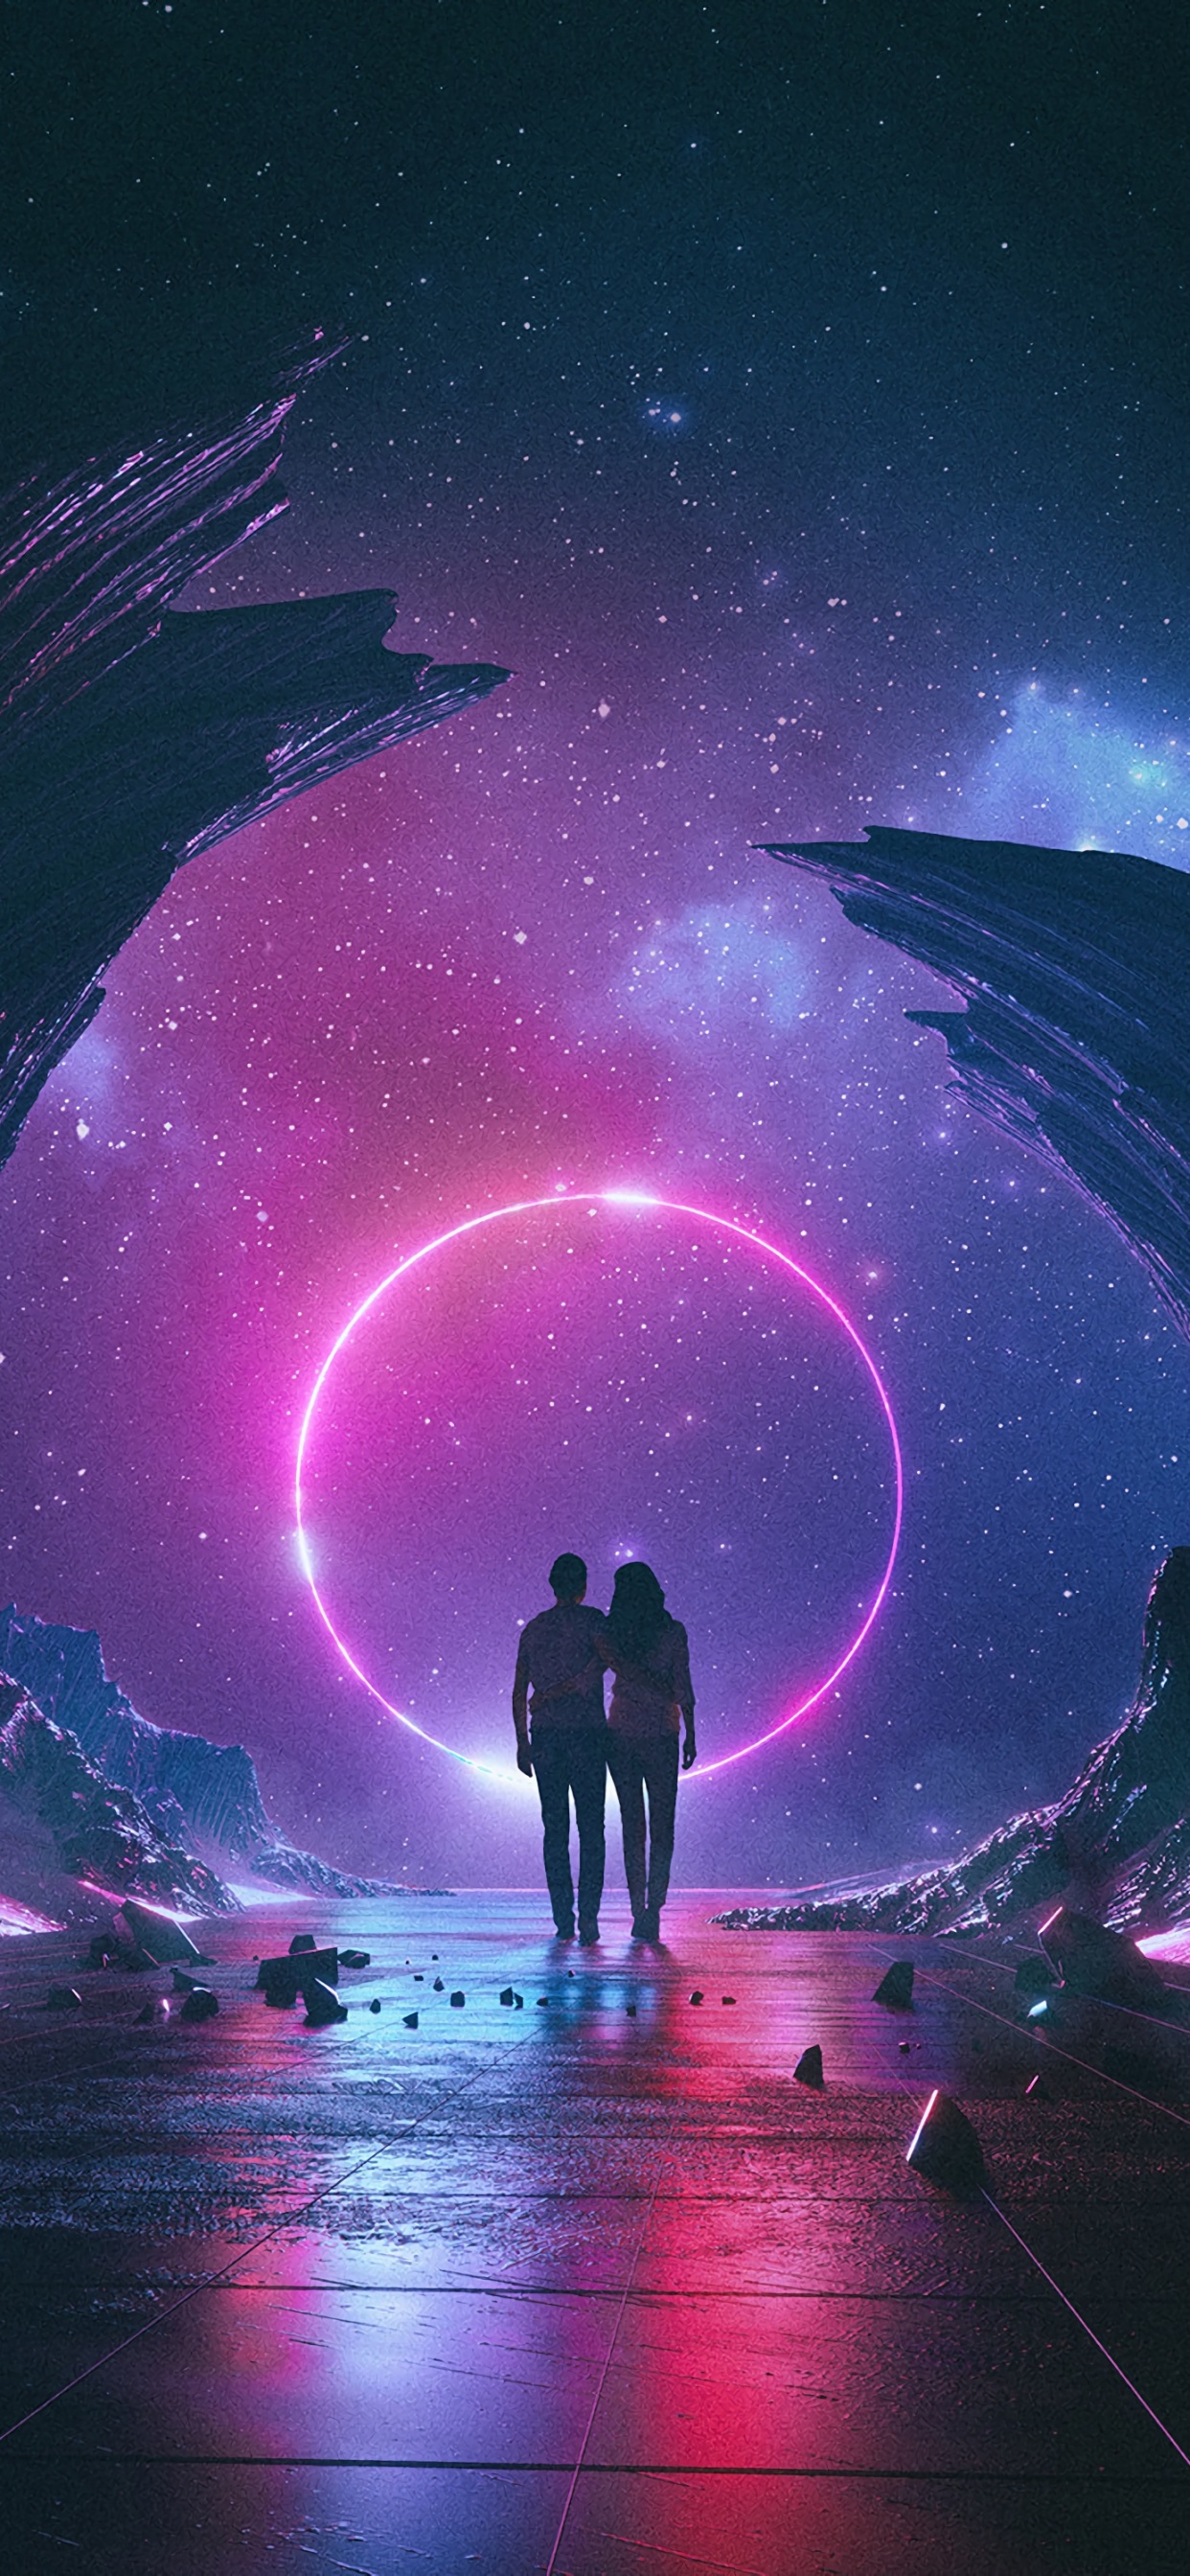 Silhouette of 2 Person Standing on The Ground Under Starry Night. Wallpaper in 1242x2688 Resolution